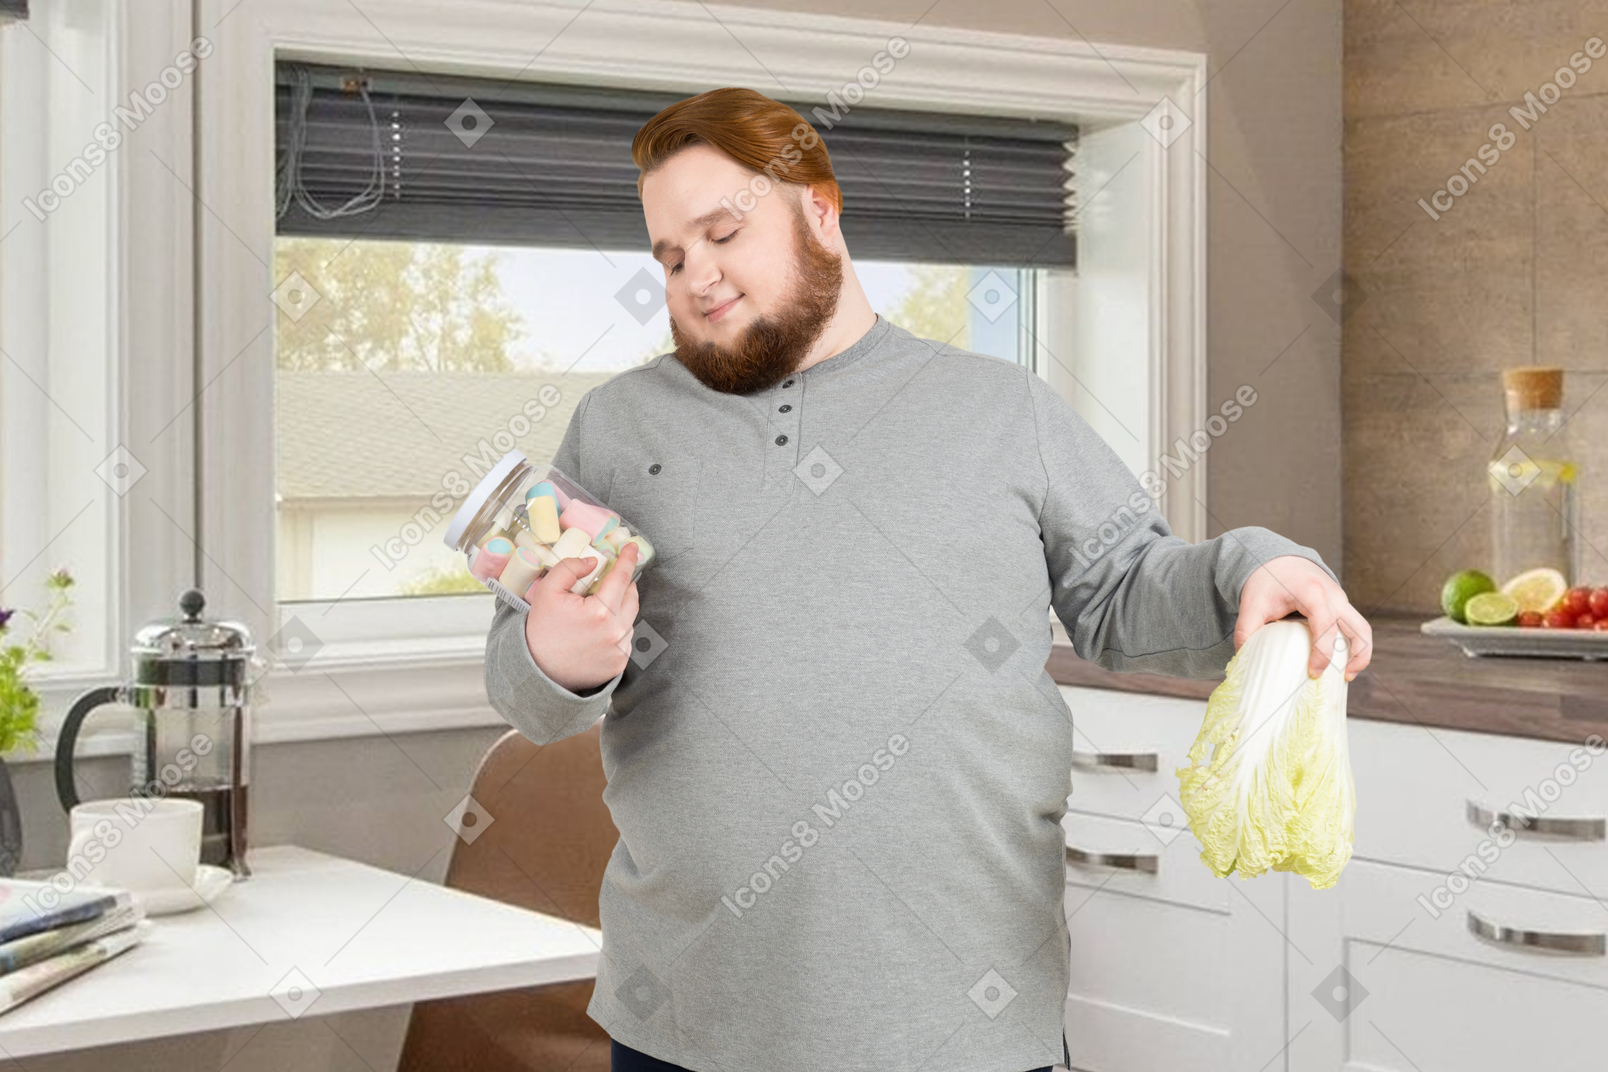 Man holding a cabbage and looking lovingly at a jar of sweets